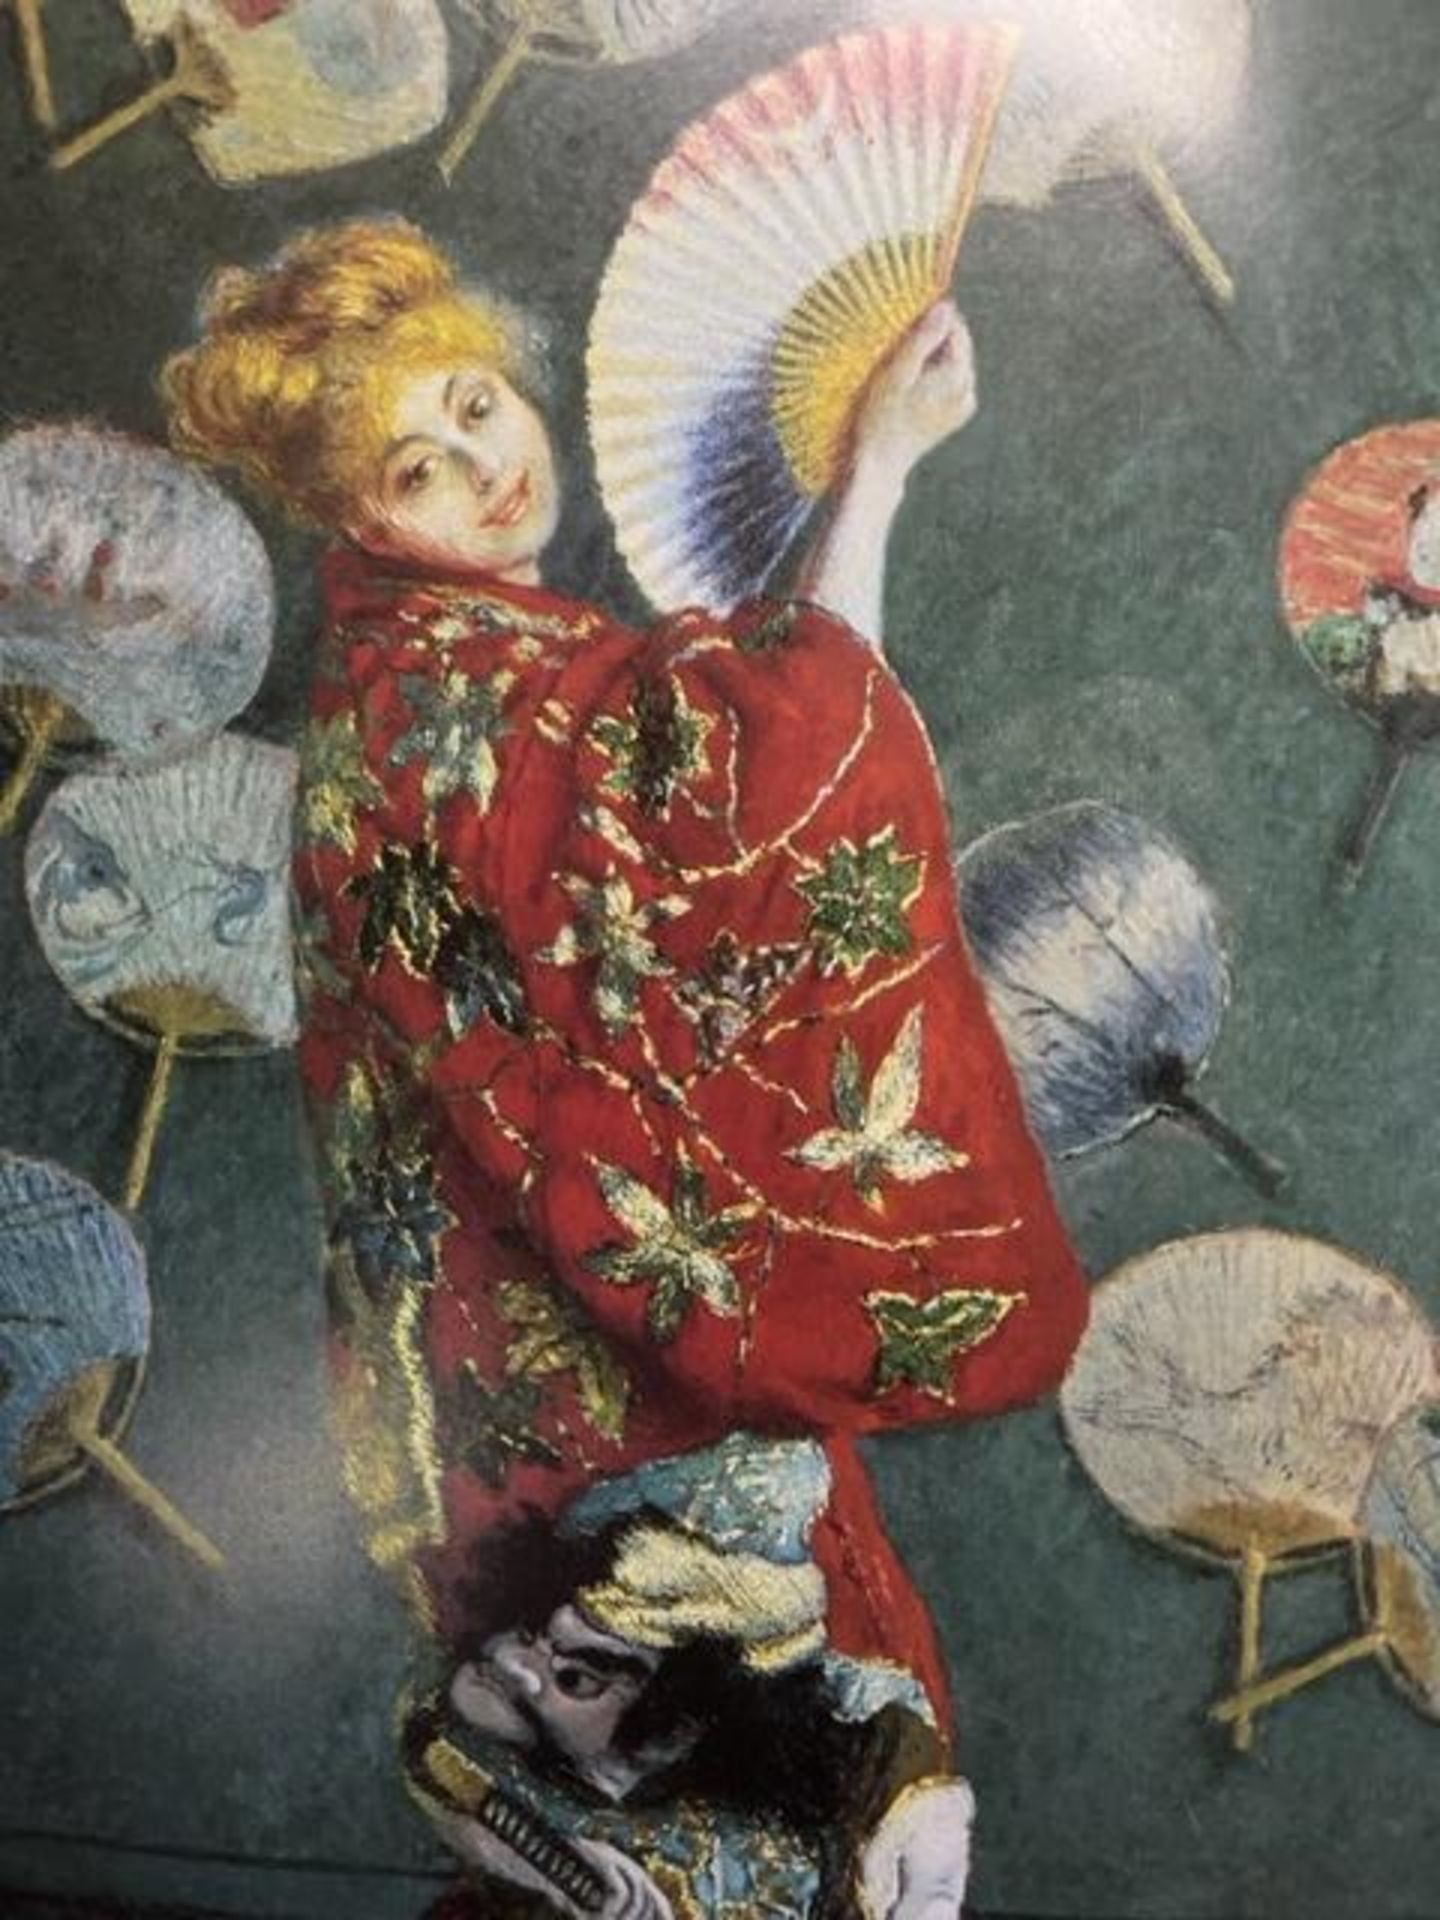 Claude Monet "Camille Monet in Japanese Costume" Print. - Image 2 of 6